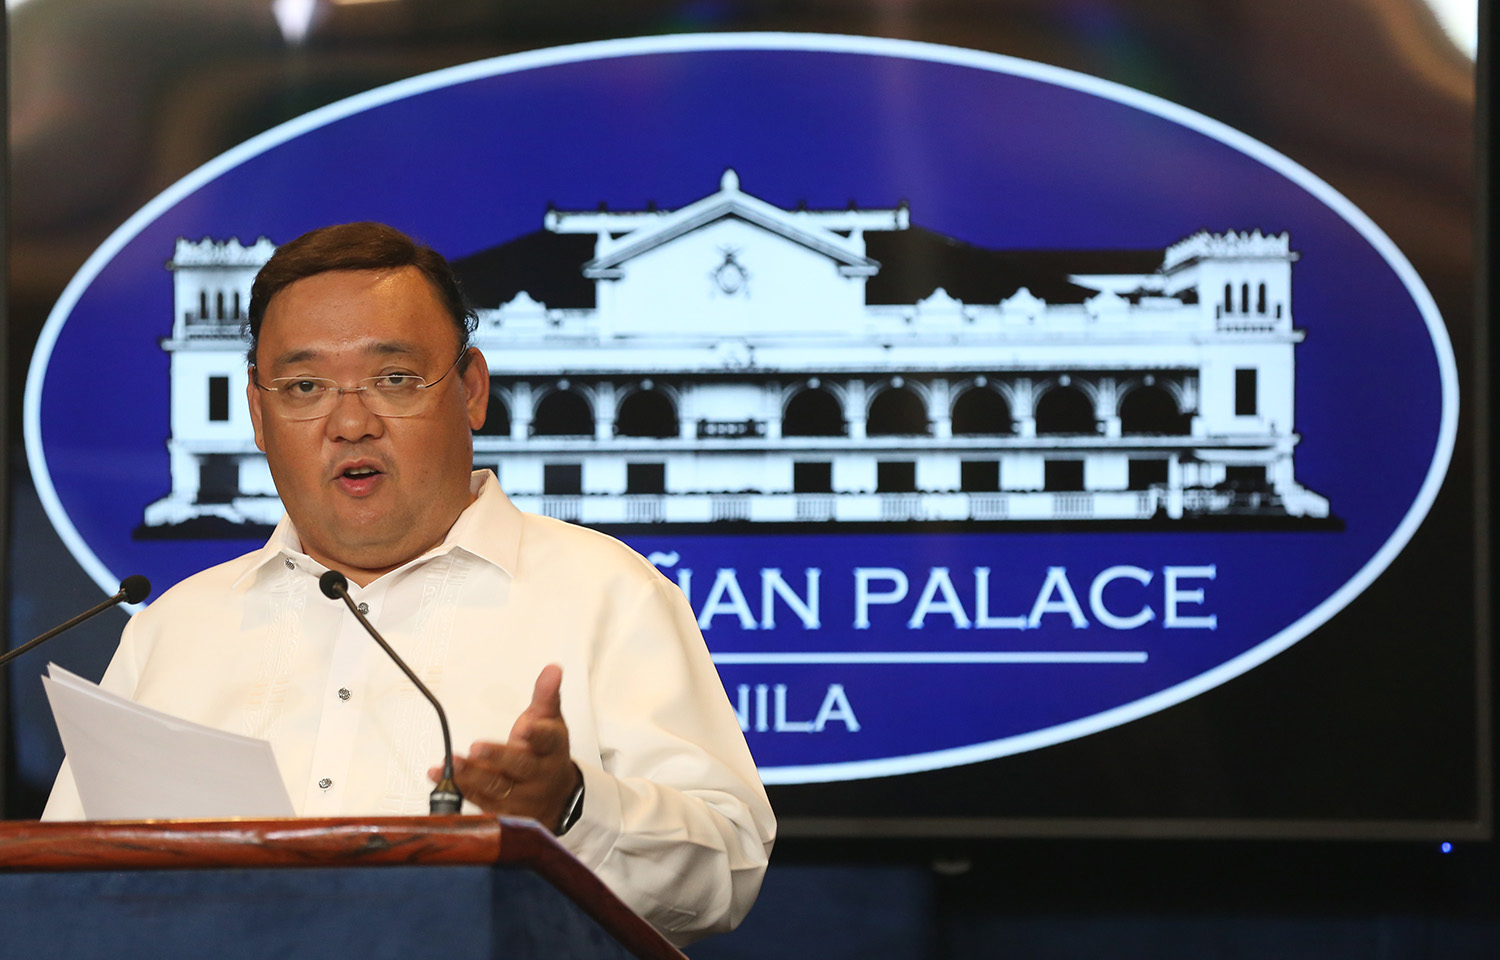 Presidential Spokesperson Harry Roque anwer questions din a press briefing at New Executive Bldg, Malacañang. INQUIRER PHOTO/JOAN BONDOC